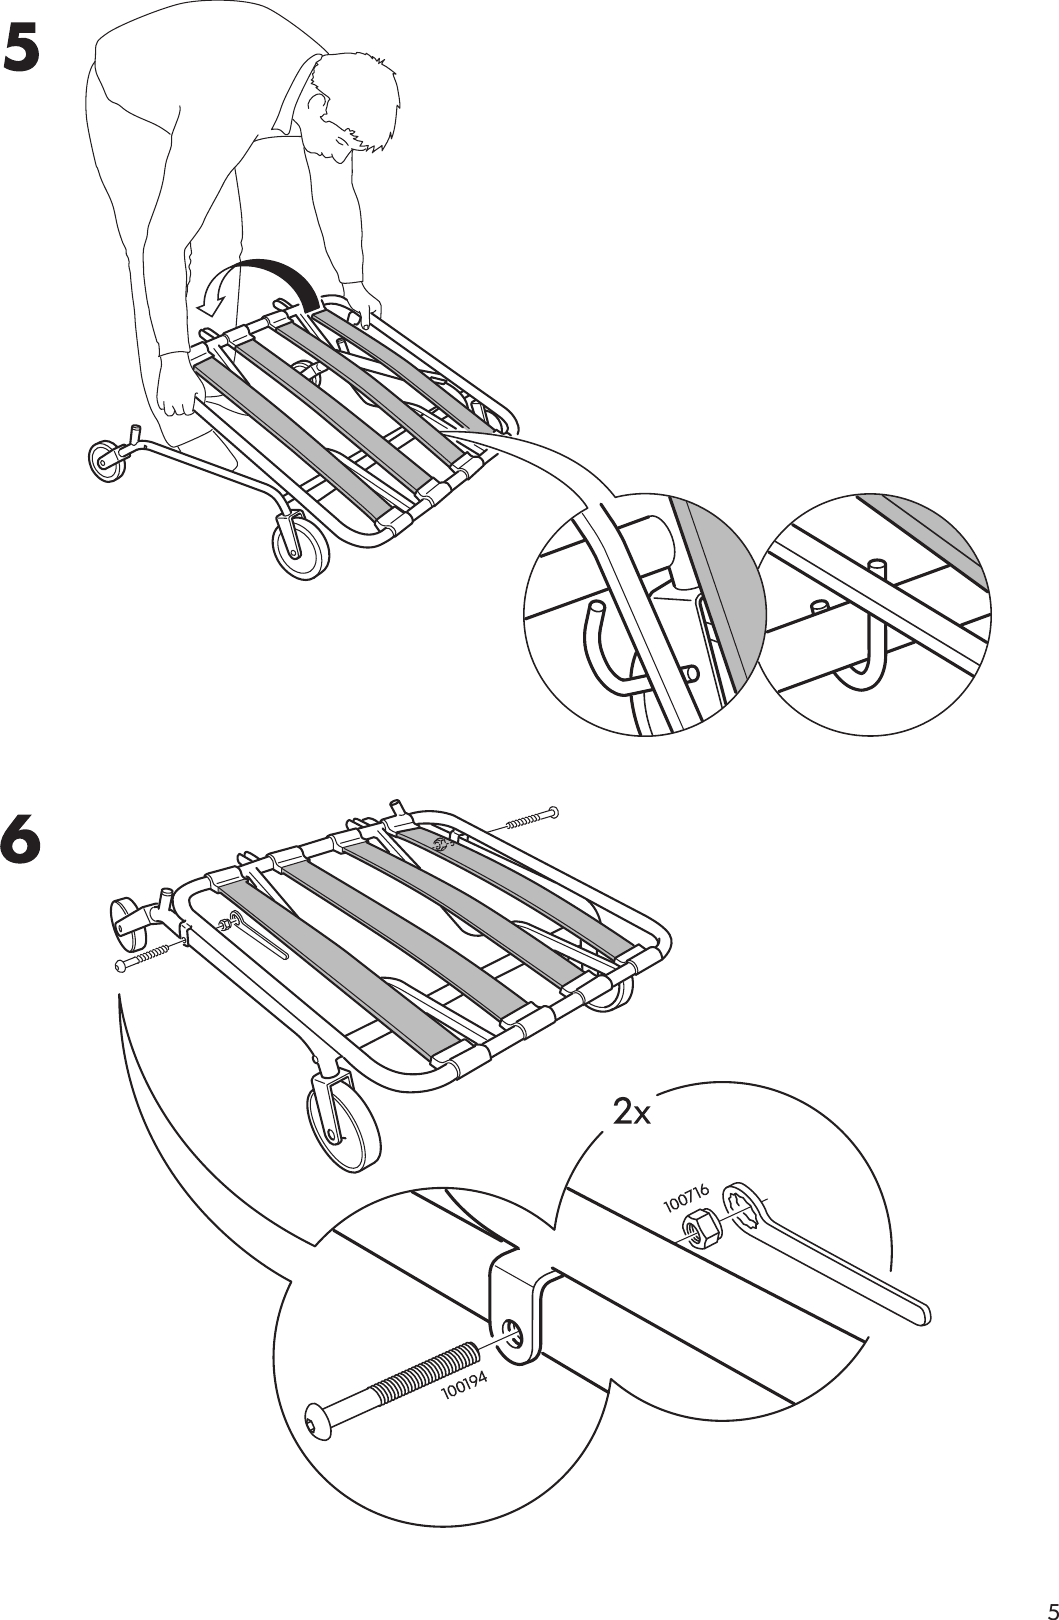 Page 5 of 12 - Ikea Ikea-Ikea-Ps-Chair-Bed-Frame-Assembly-Instruction